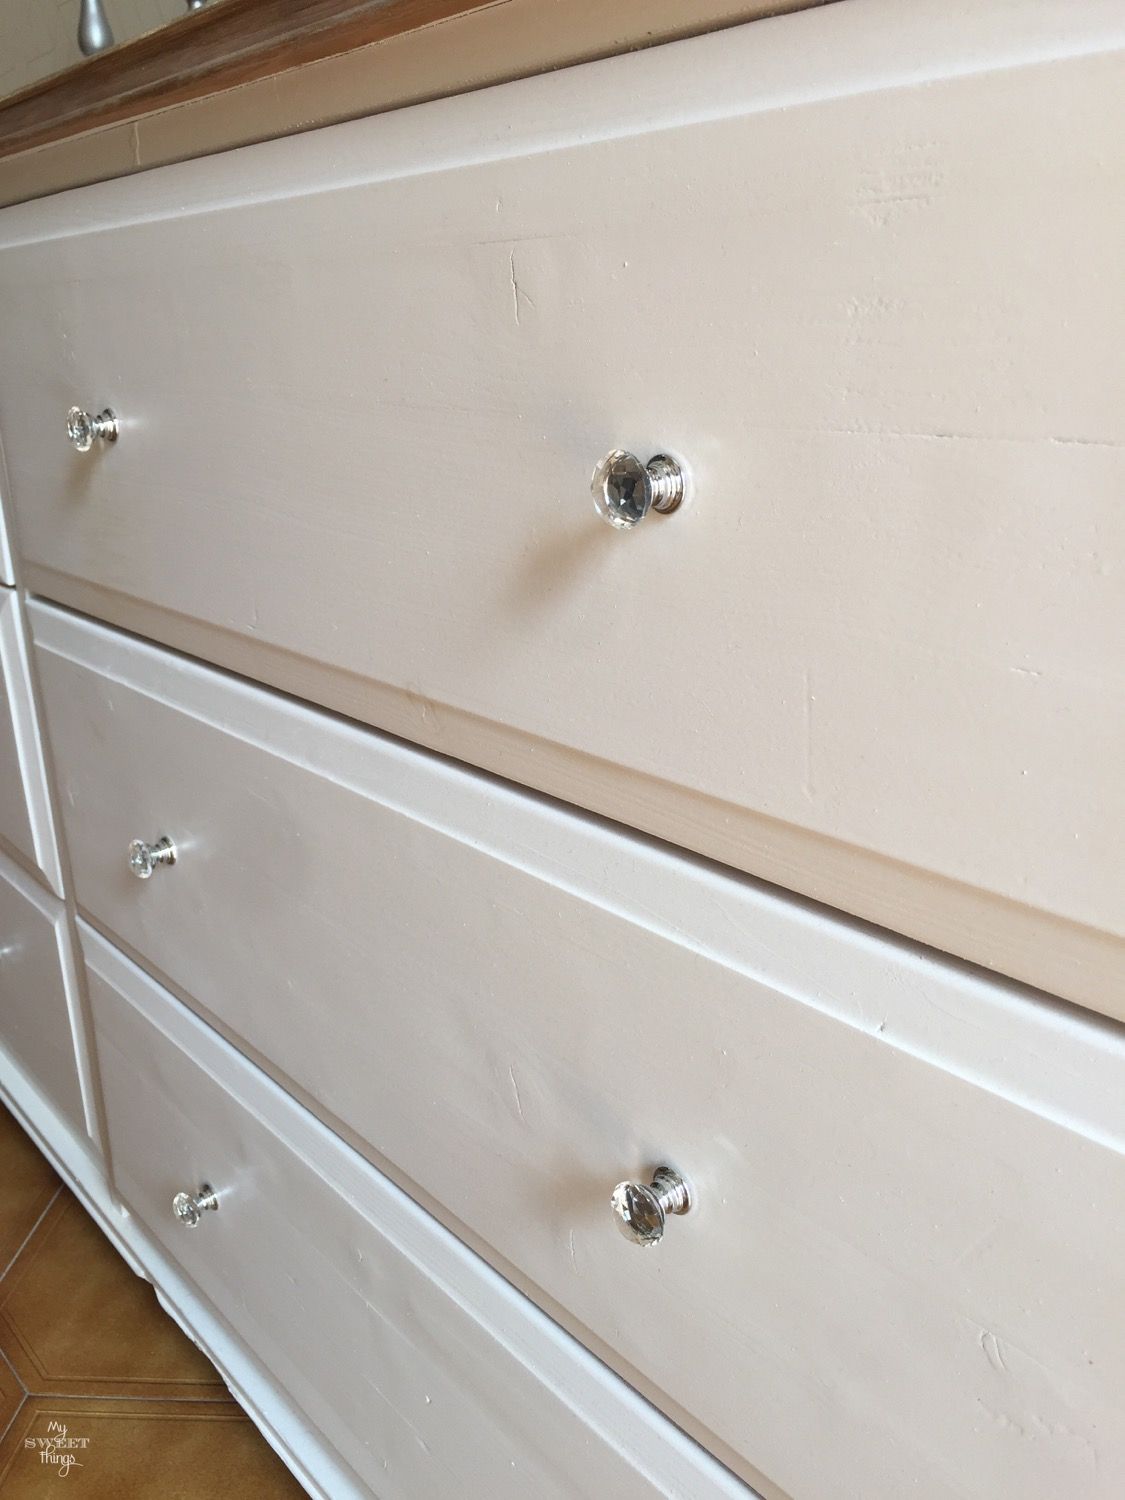 Two tone sideboard makeover · Walnut and off white · Via www.sweethings.net #two-tone #dresser #sideboard #makeover #furniture